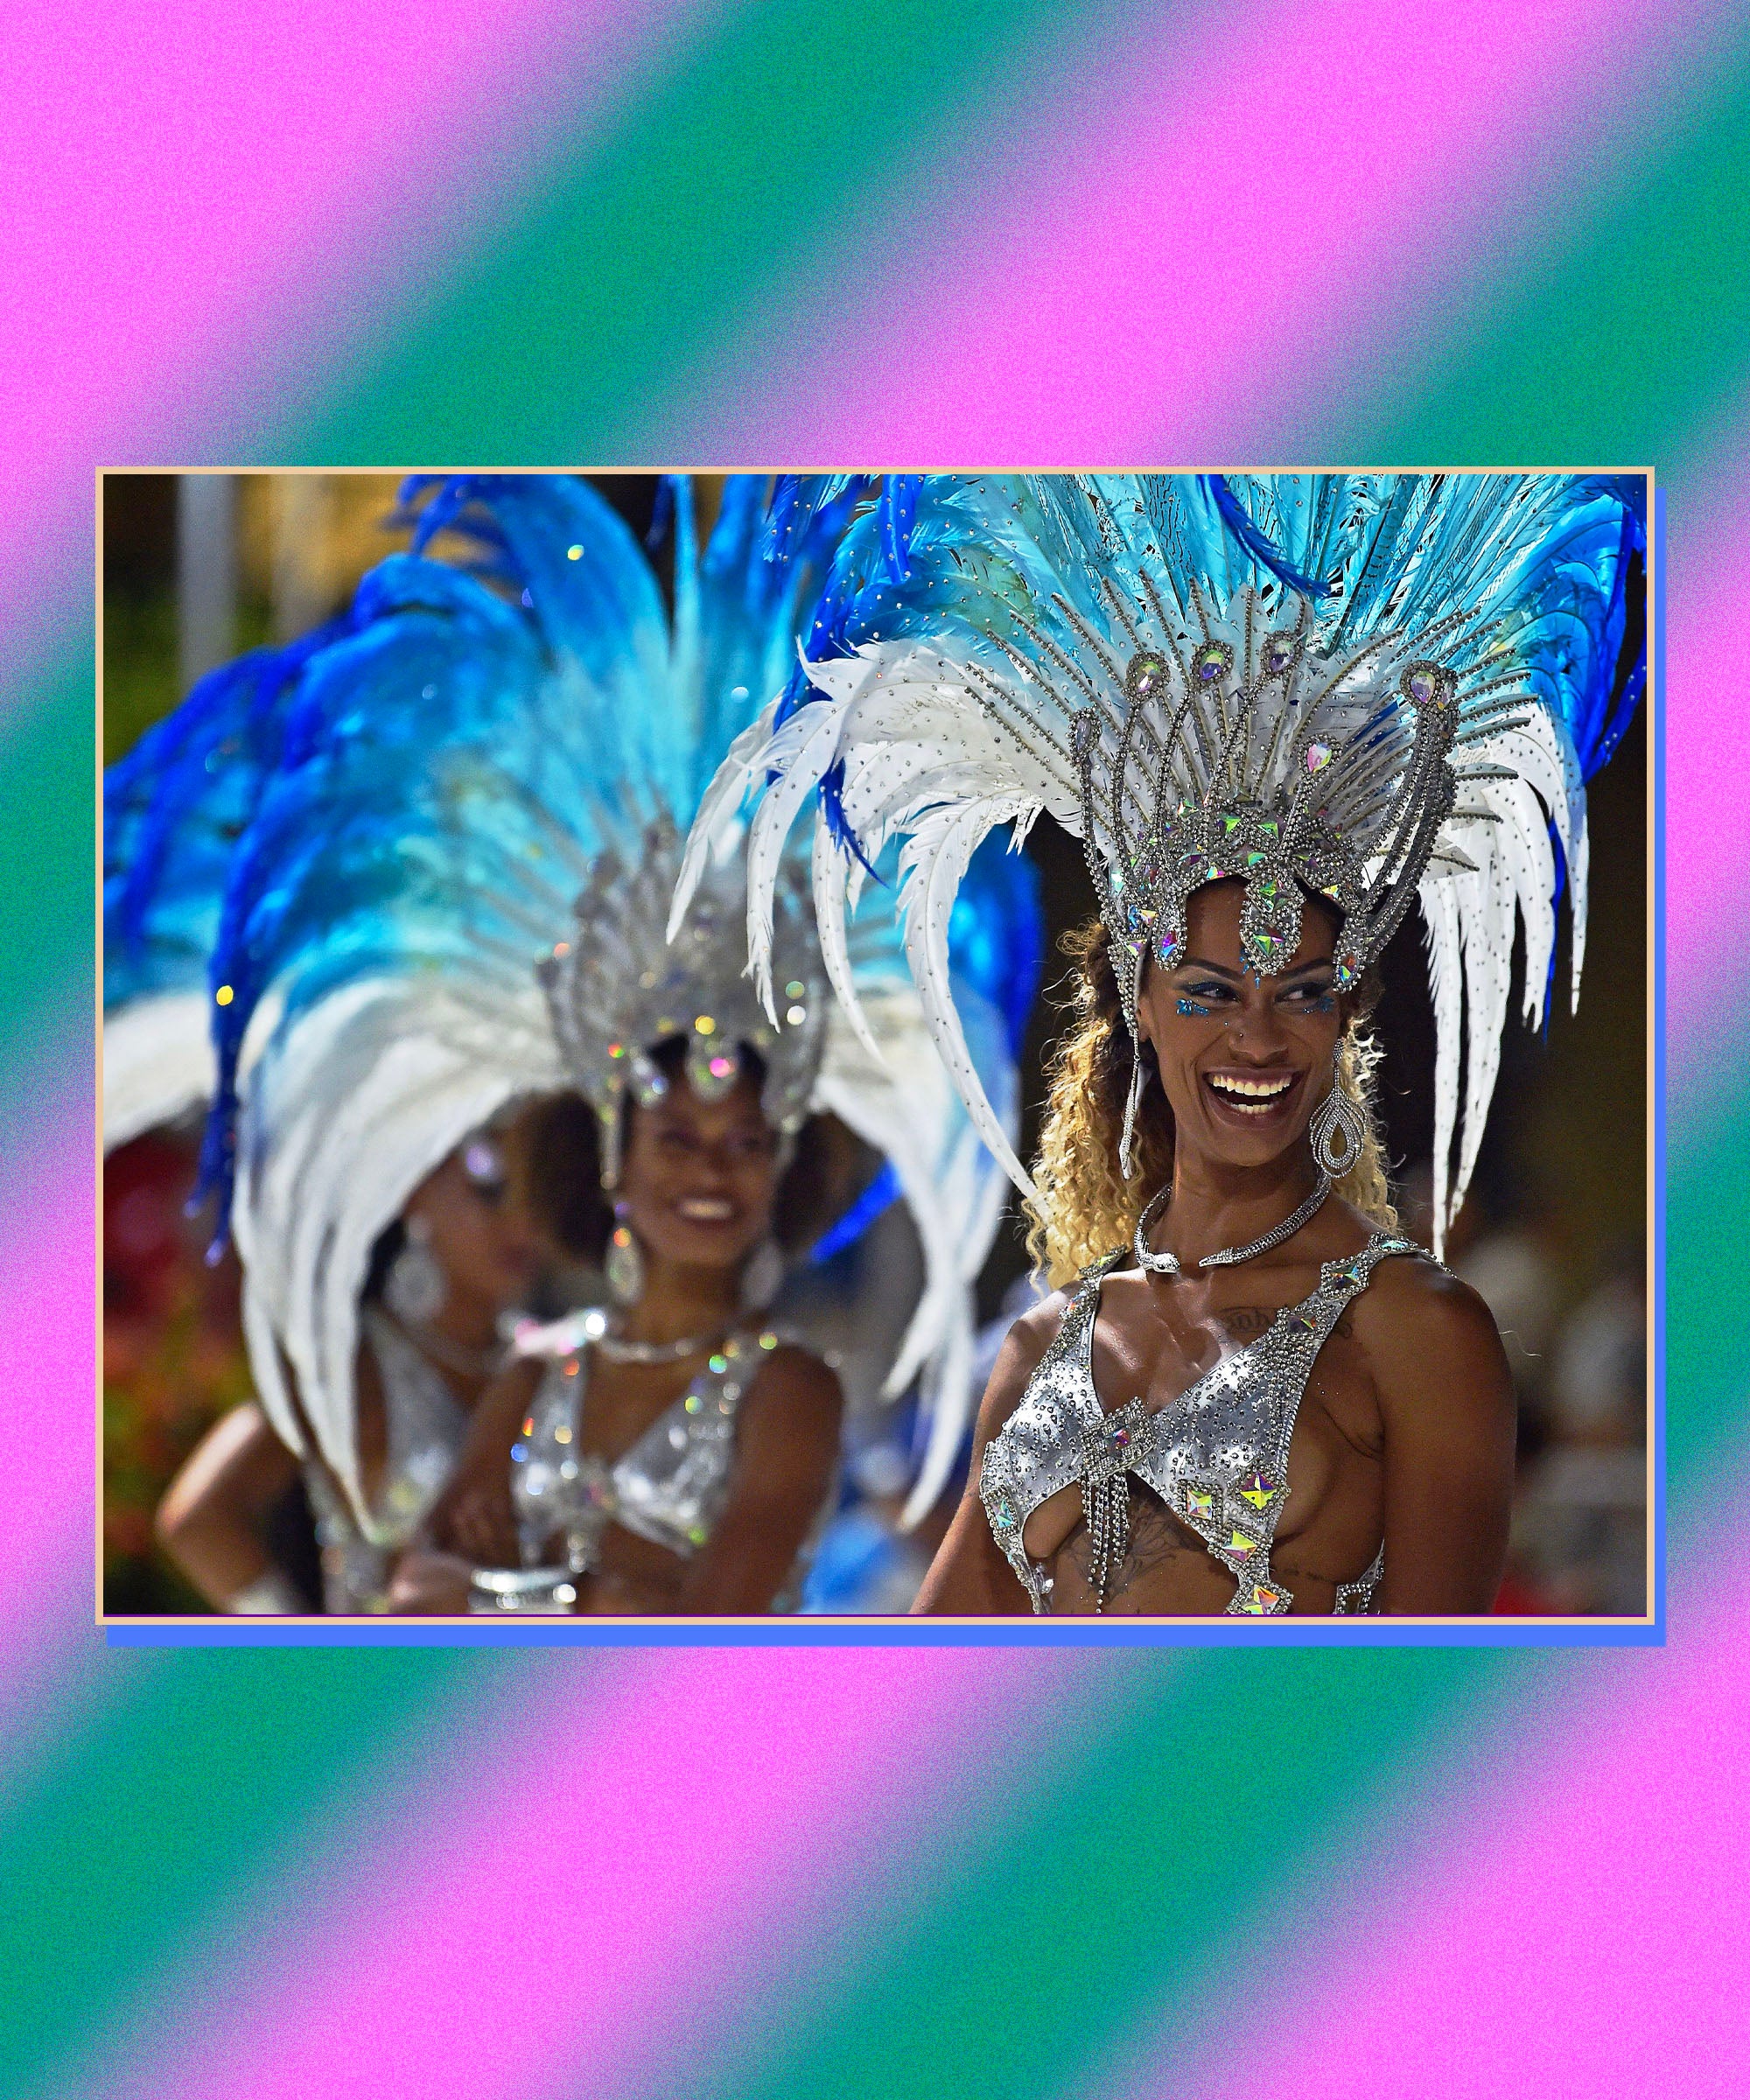 Vibrant pictures show the Caribbean's Carnival 'rebellion